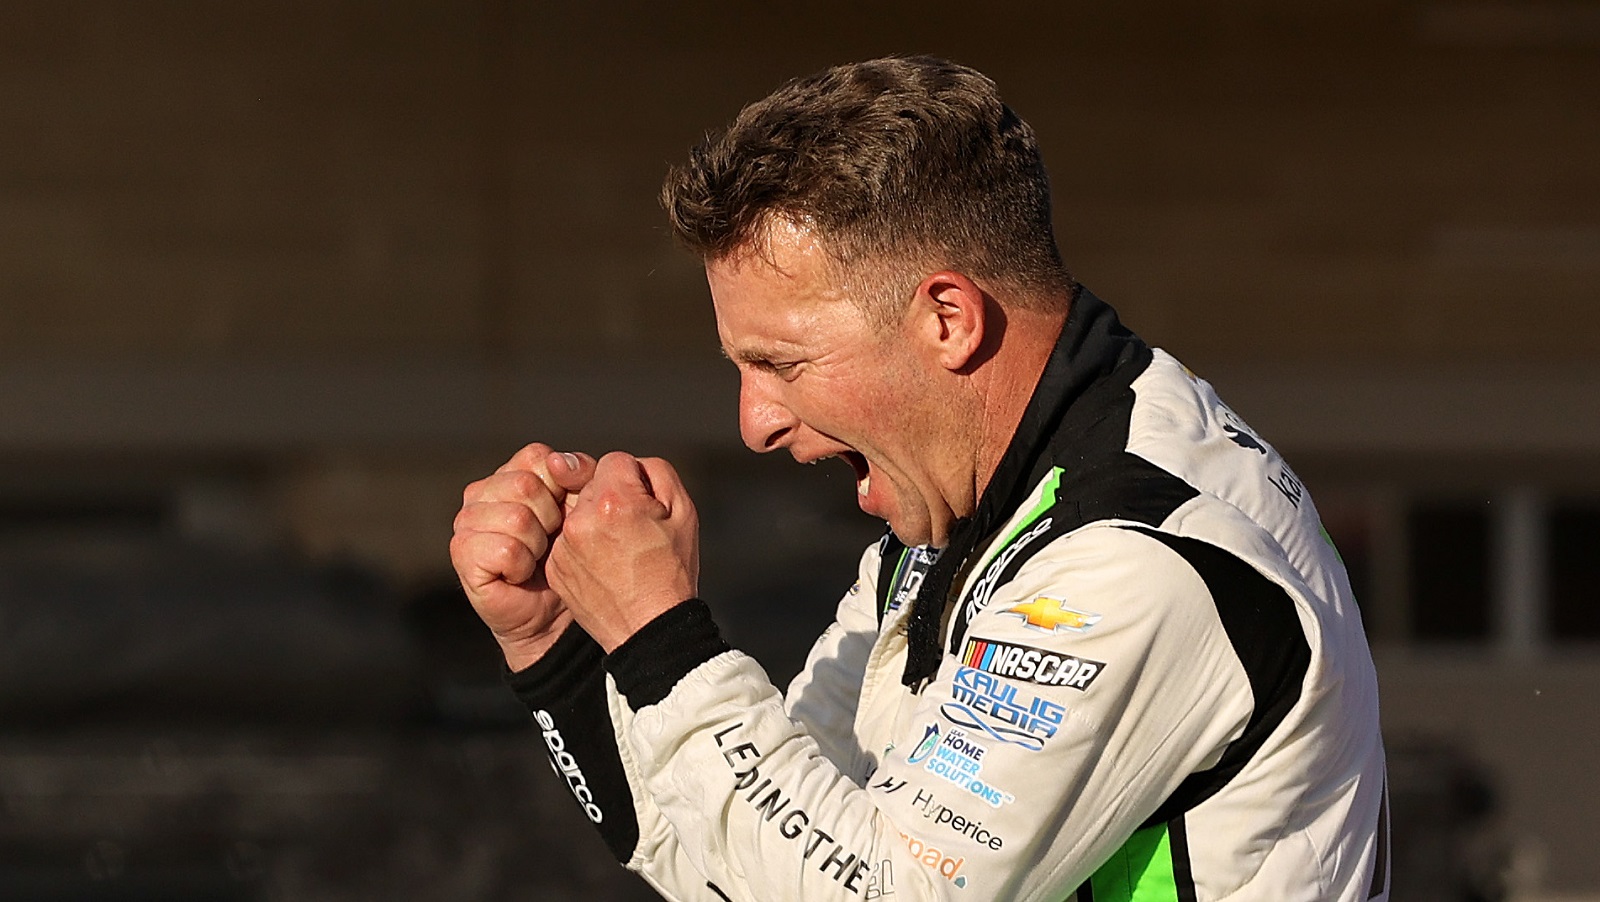 AJ Allmendinger Starts at Front of the Class in the 2022 NASCAR Xfinity Series Dash for Cash